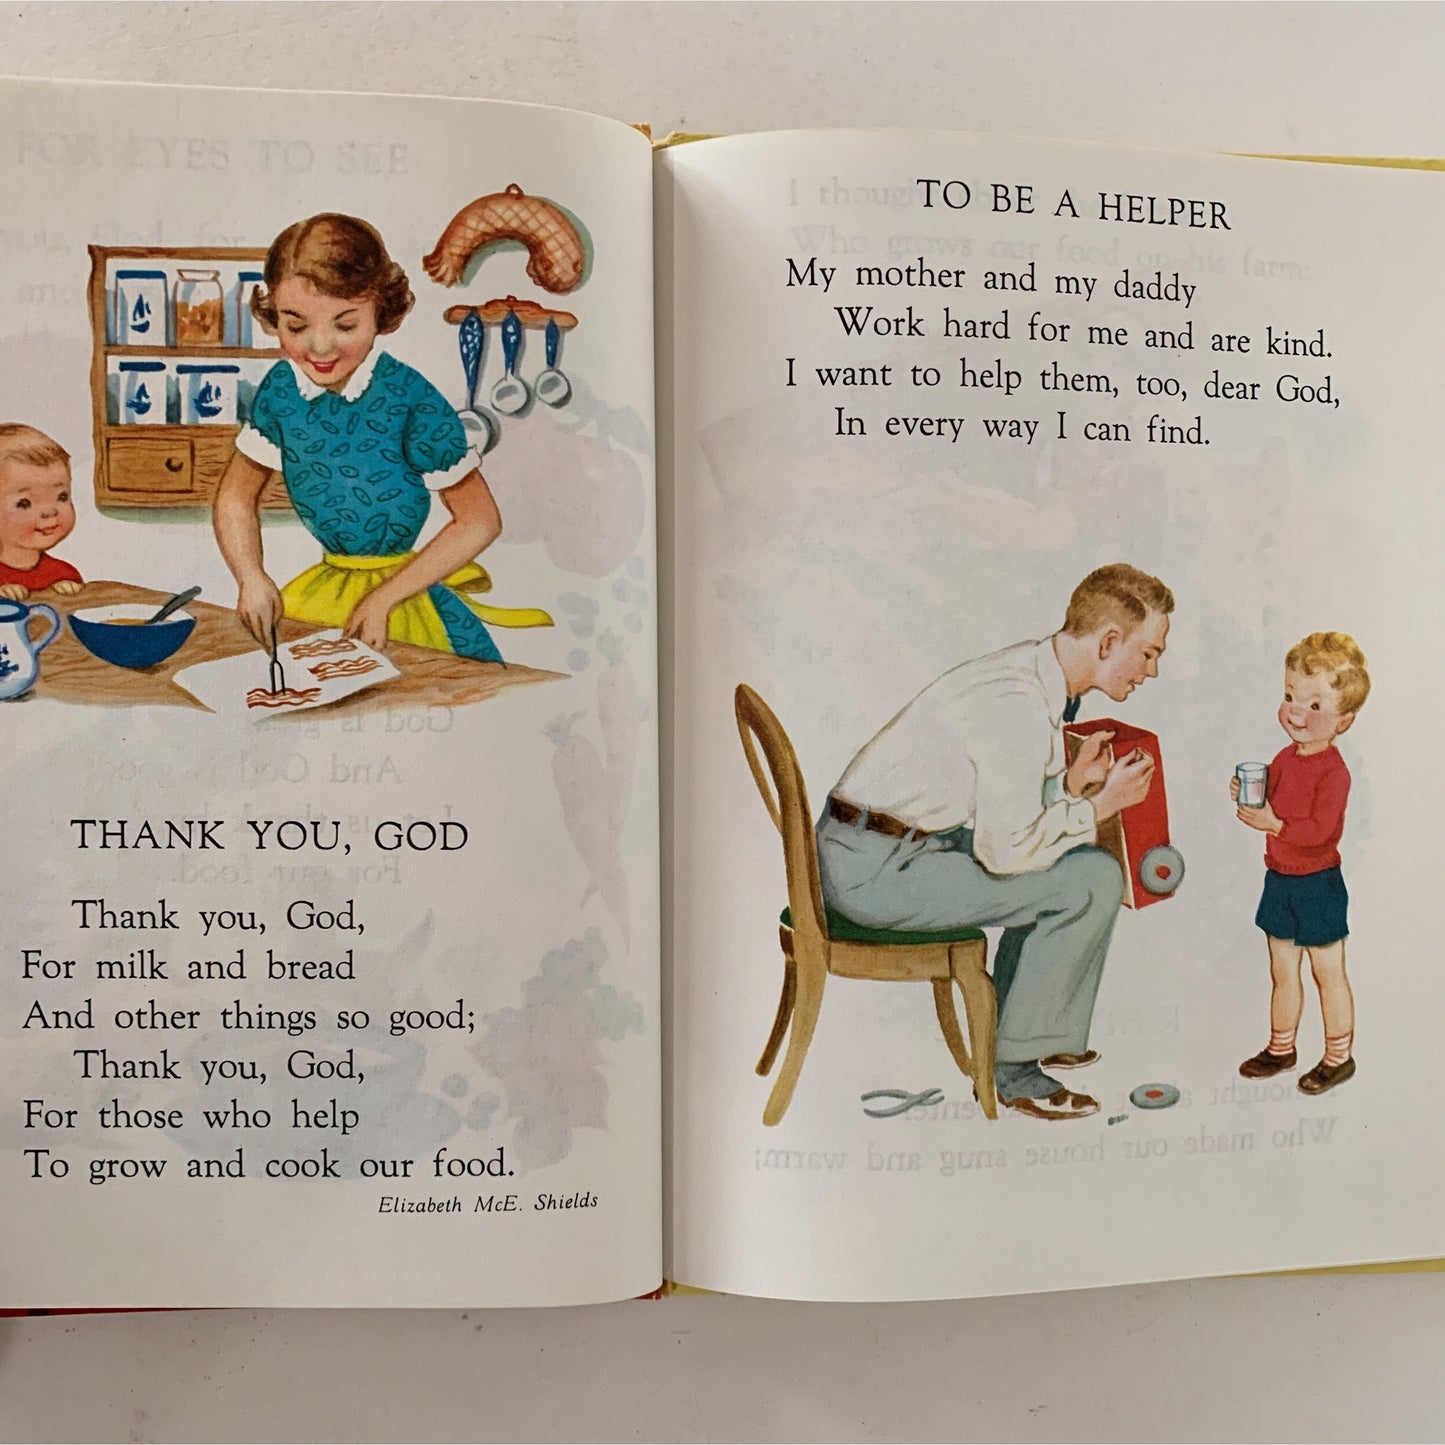 Prayers and Graces for a Small Child, A Rand McNally Book, Hardcover, 1955